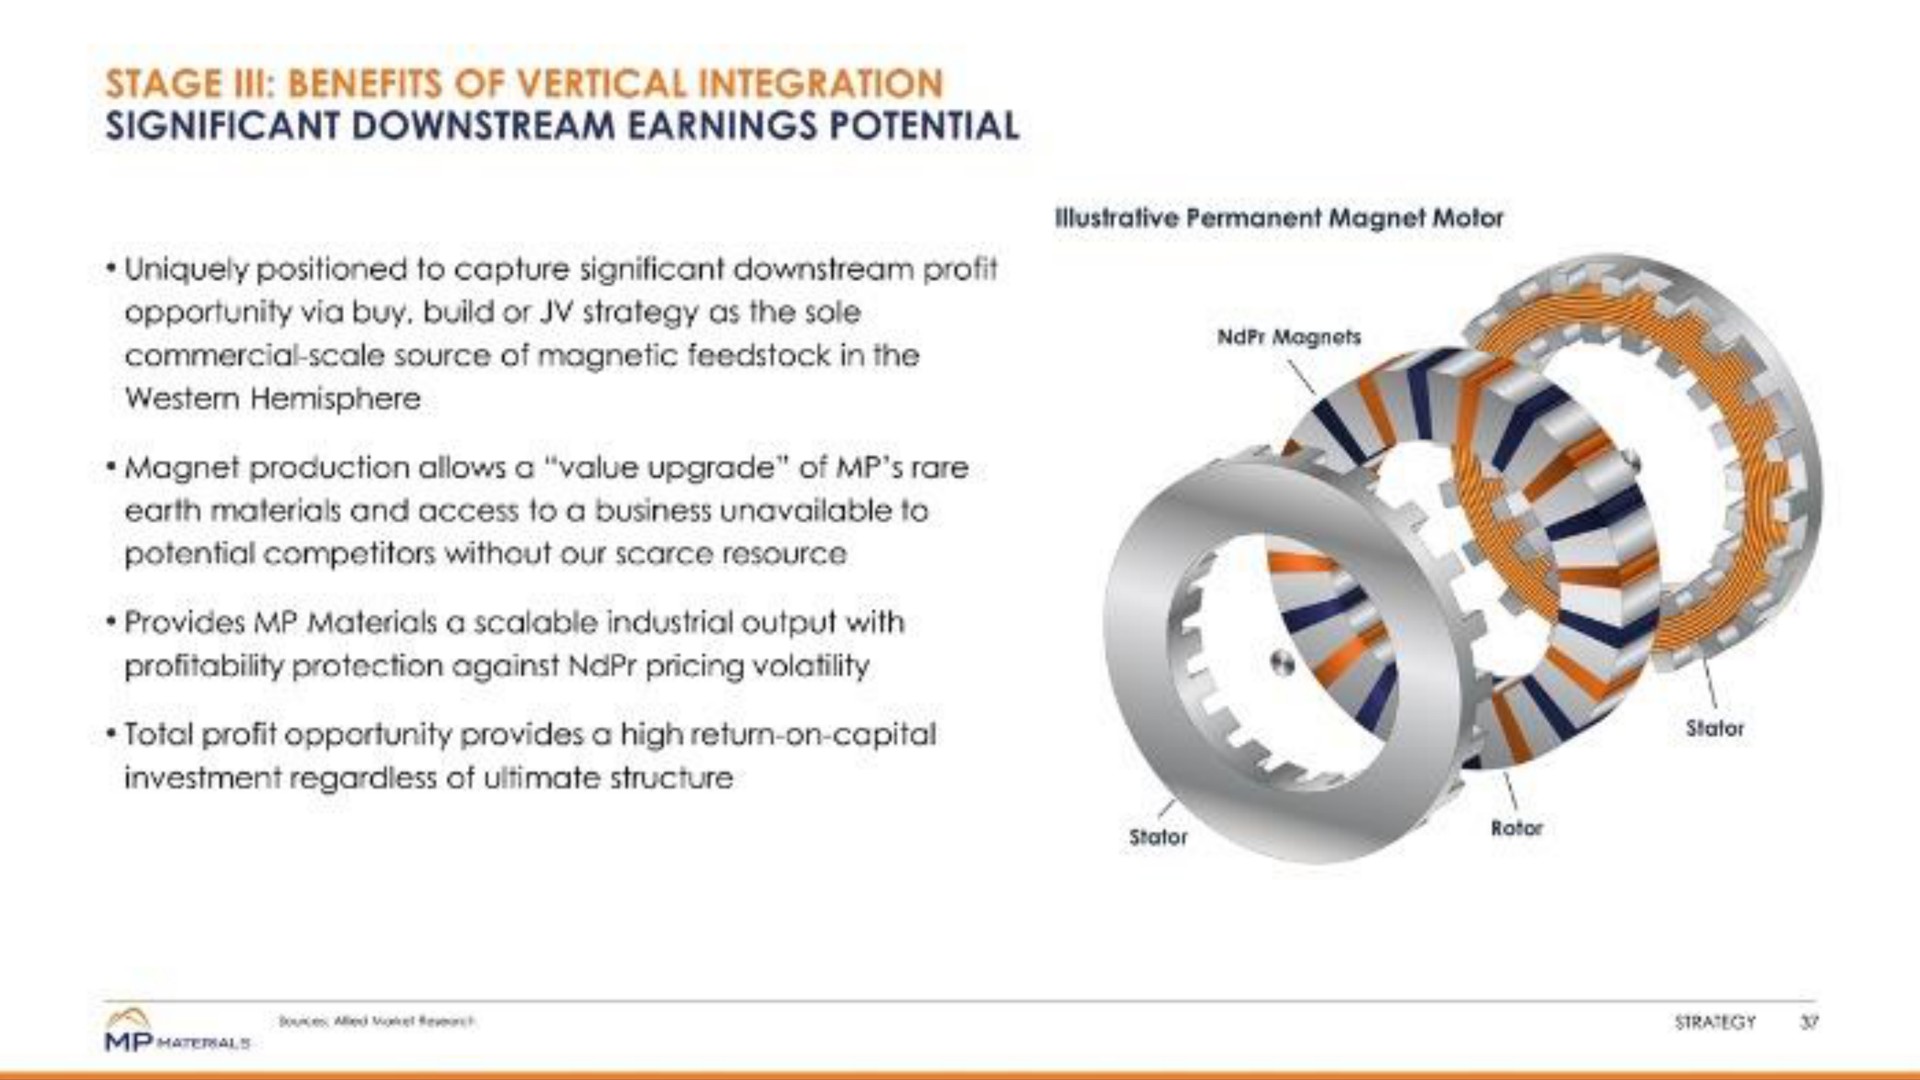 stage ill benefits of vertical integration significant downstream earnings potential | MP Materials